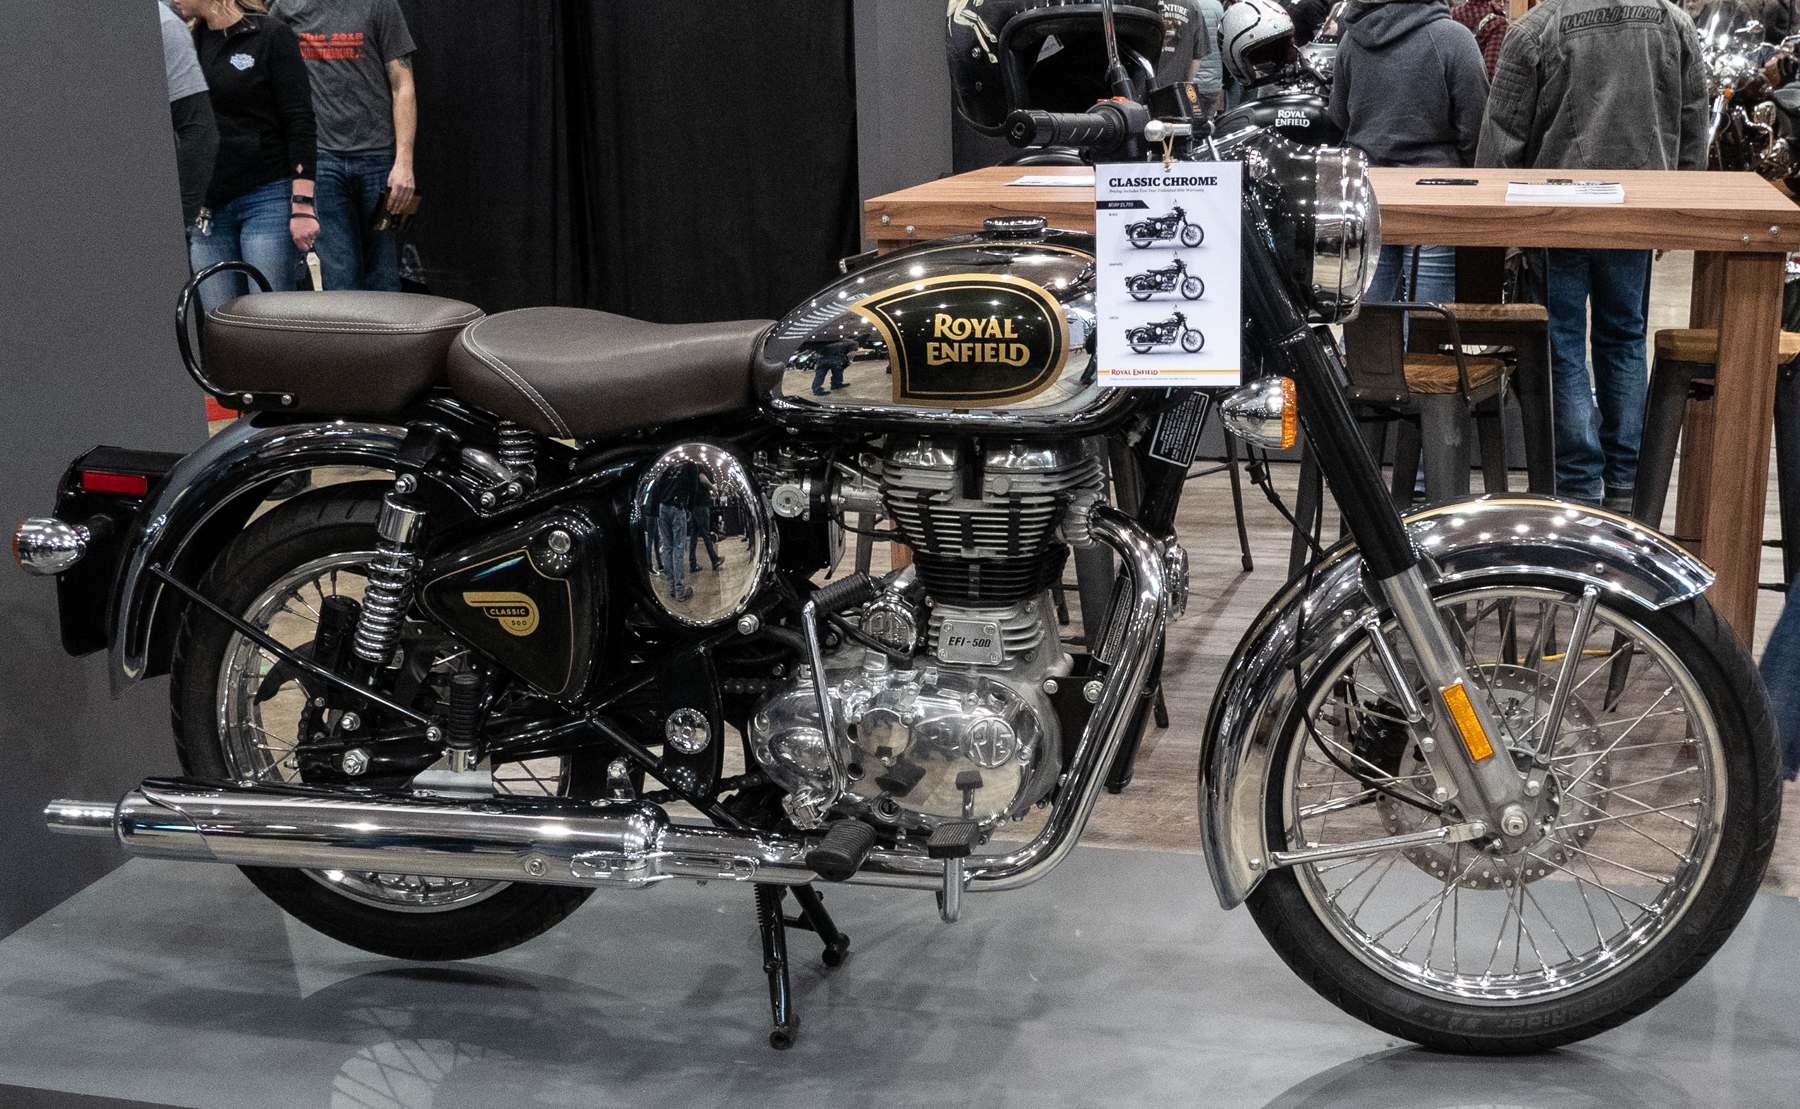 cleveland motorcycle show1 International Motorcycle Shows 2019 in Cleveland